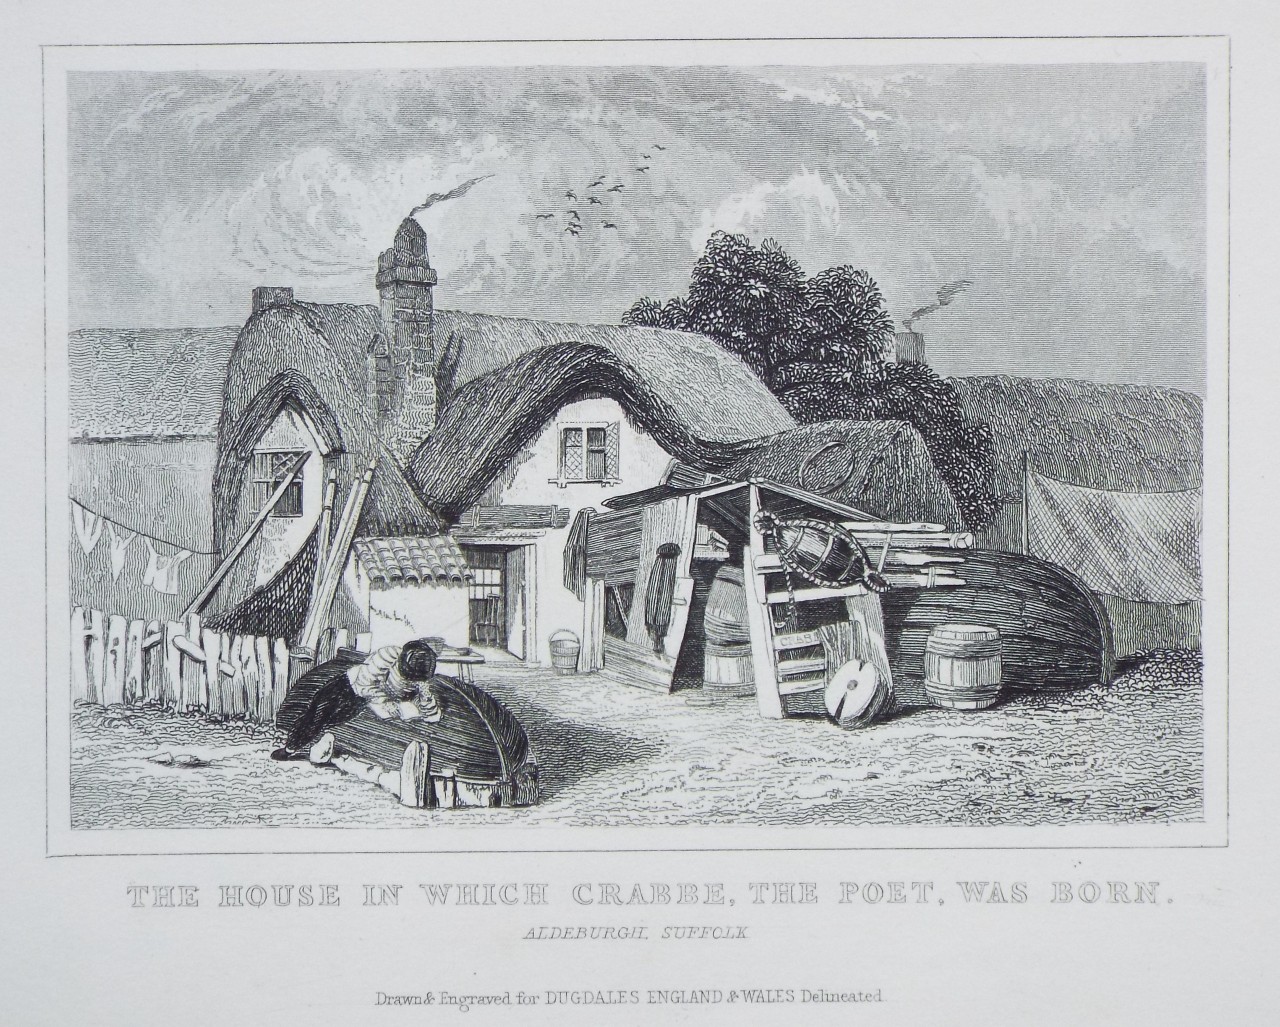 Print - The House in which Crabbe, the Poet, Aldeburgh, Suffolk.